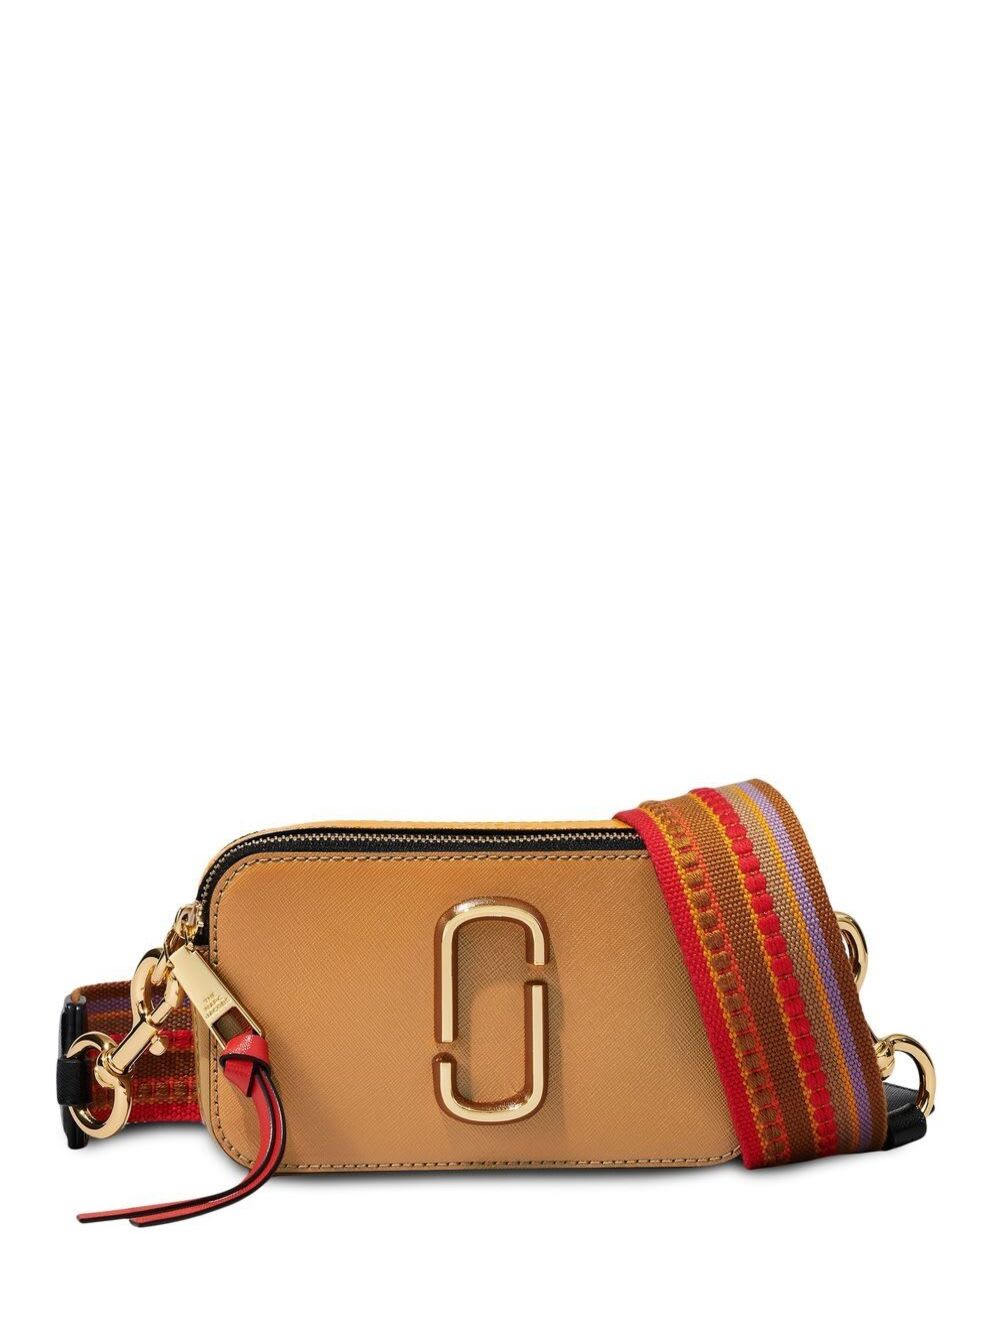 The Colorblock Snapshot Beige Leather Crossbody Bag Marc Jacobs Woman